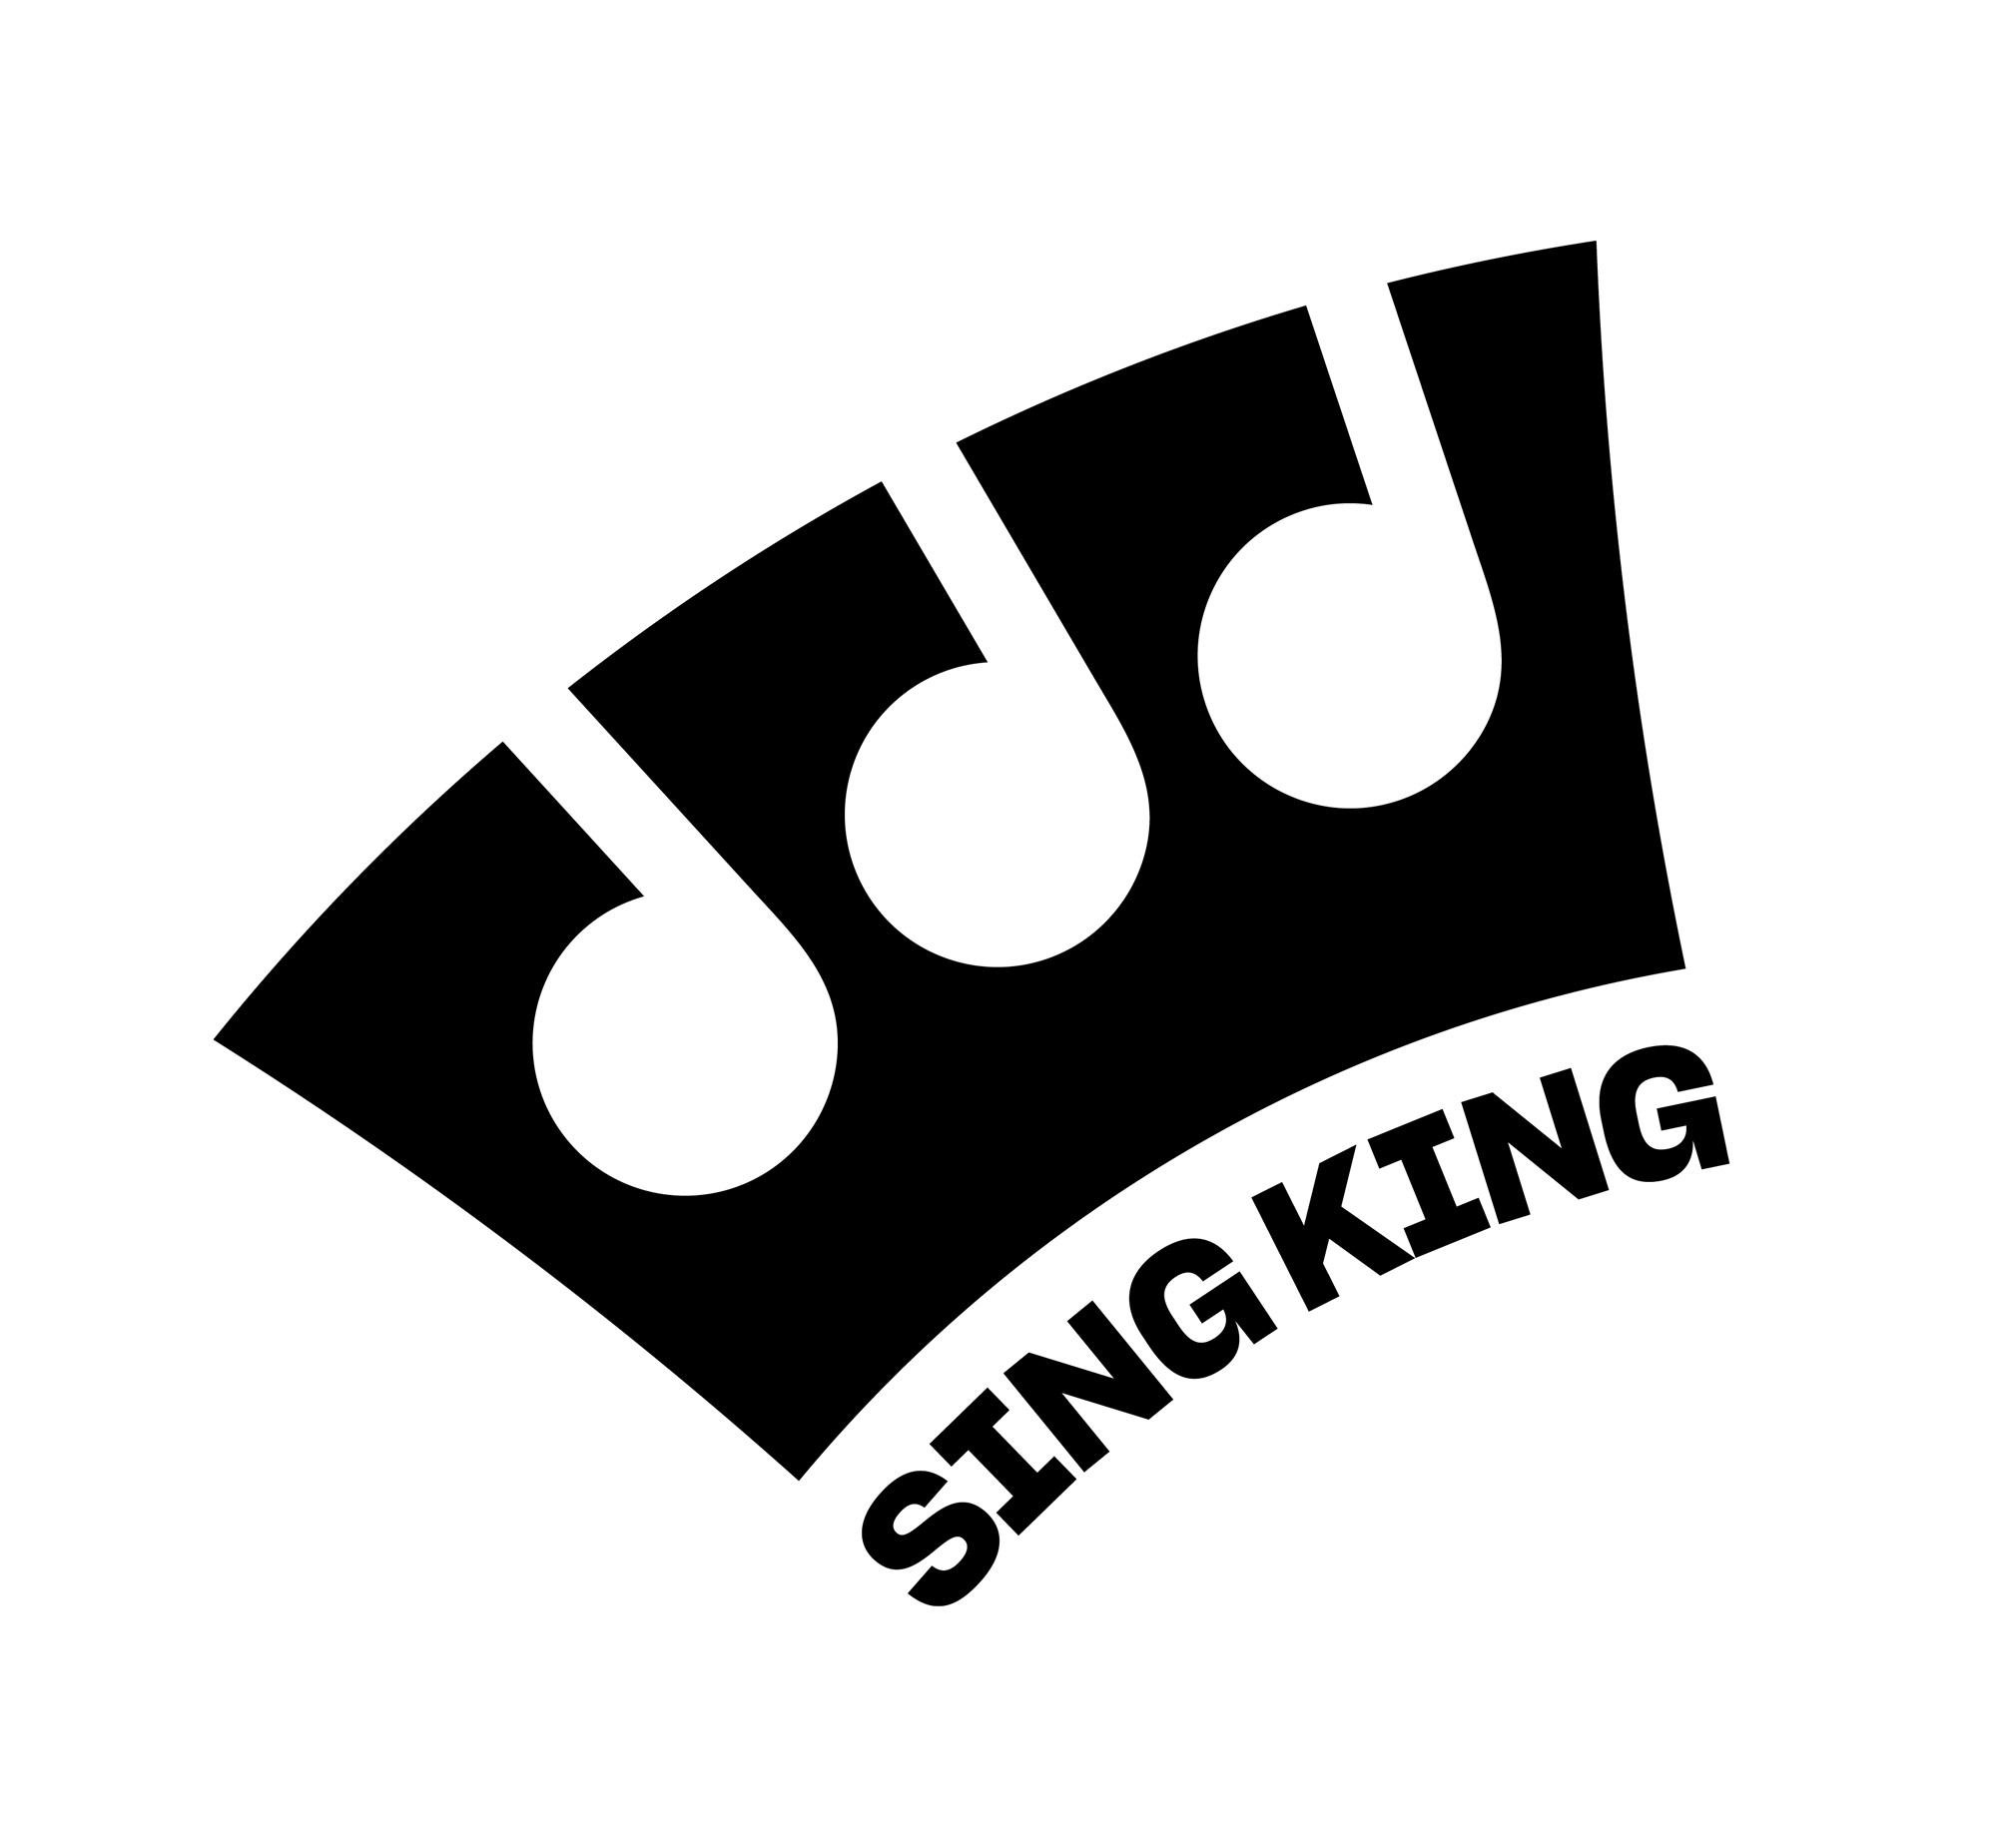 Reviewed: New Logo and Identity for Sing King by Nomad